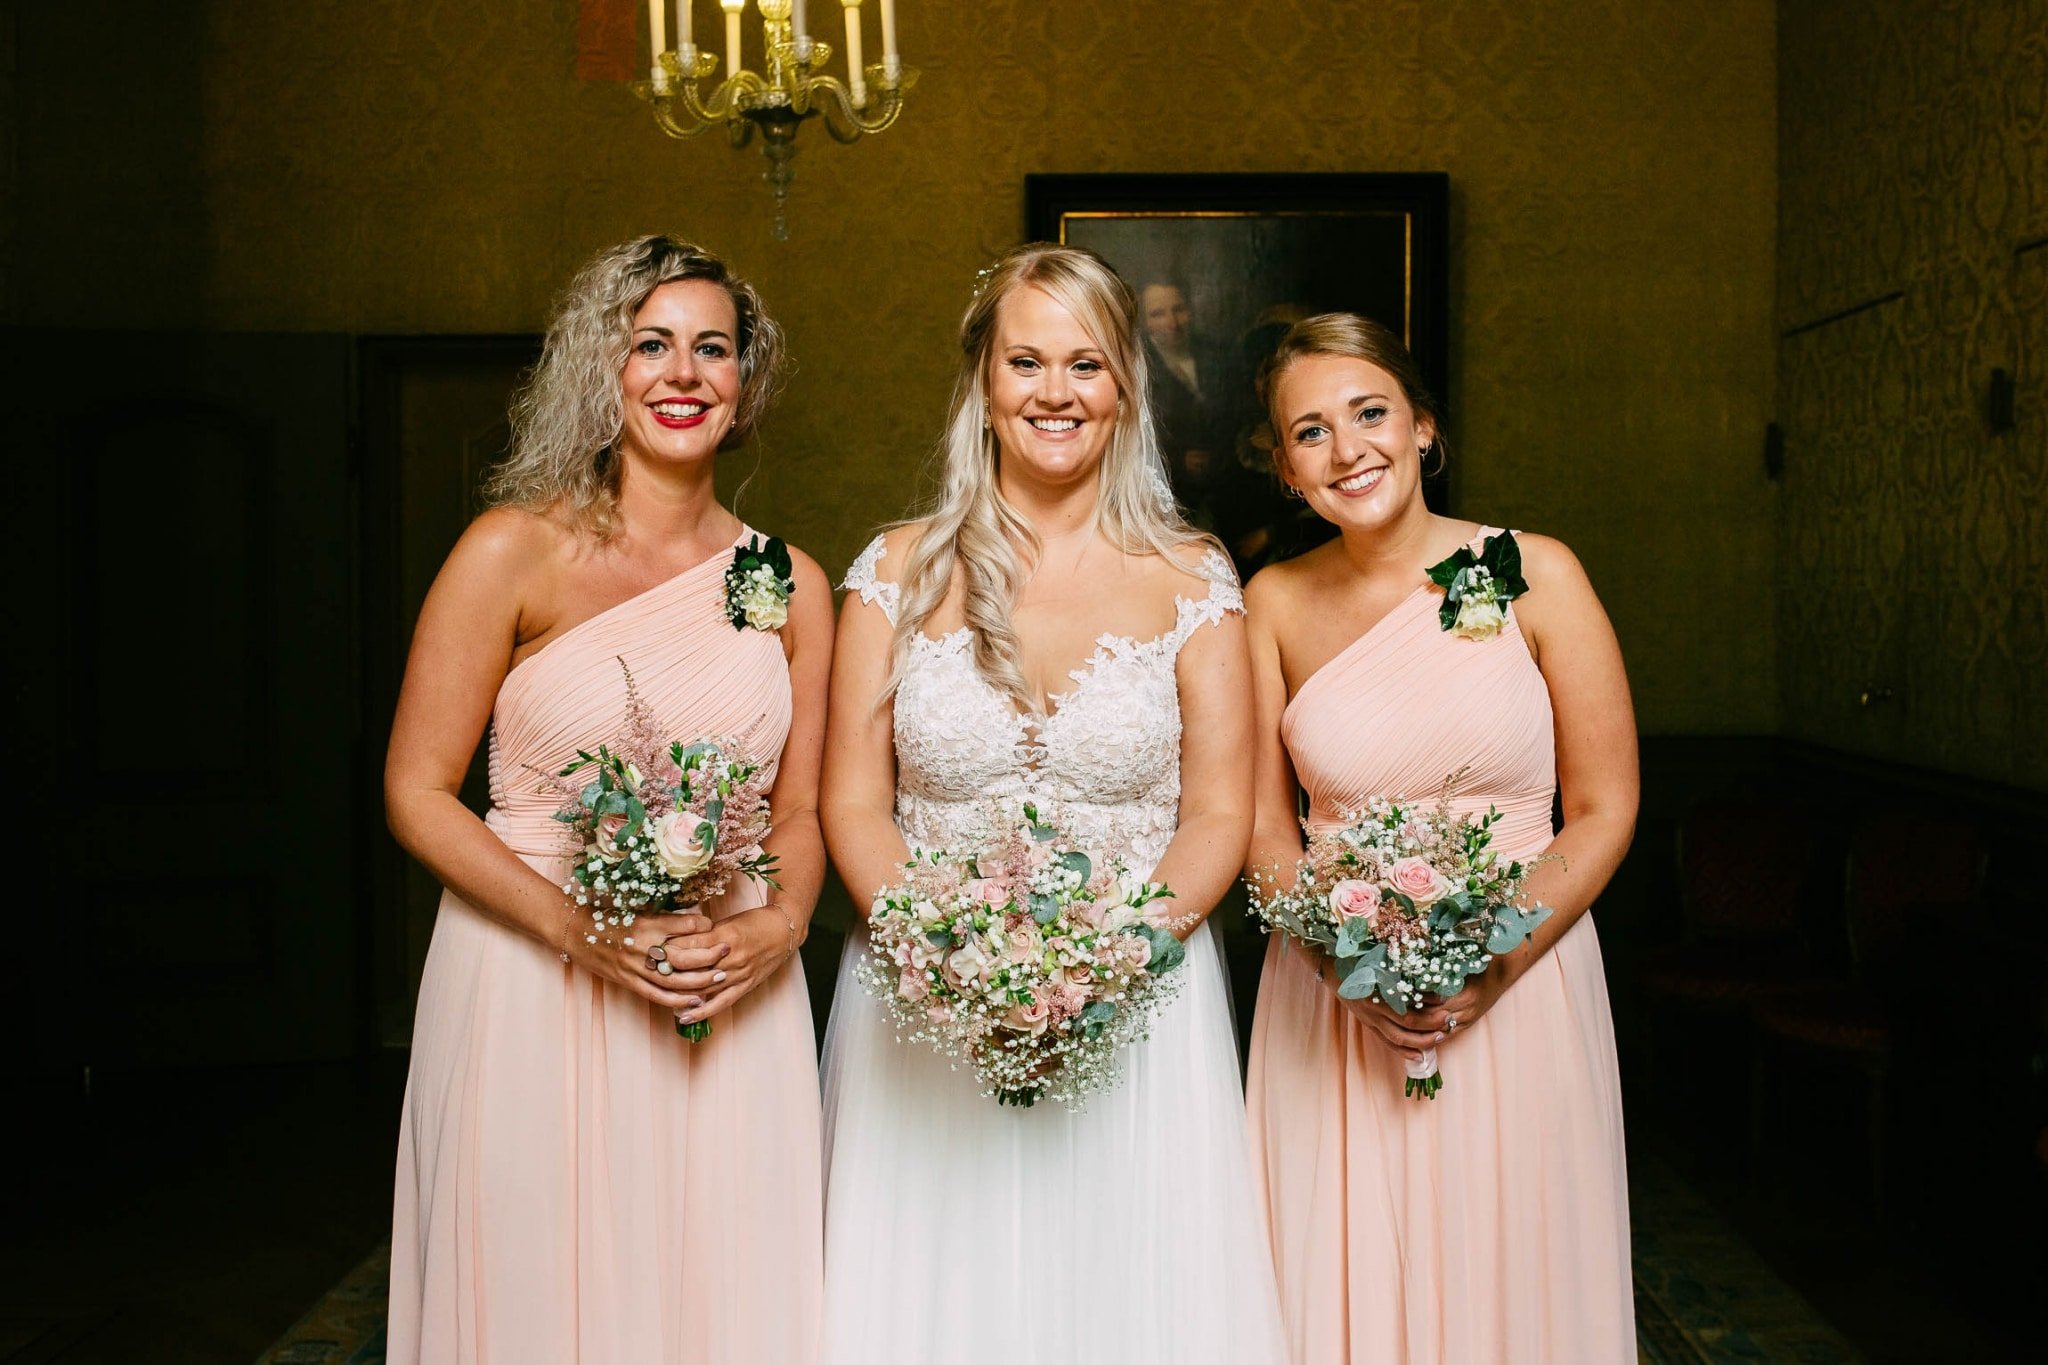 Three bridesmaids in pink dresses stand in an ornate room.